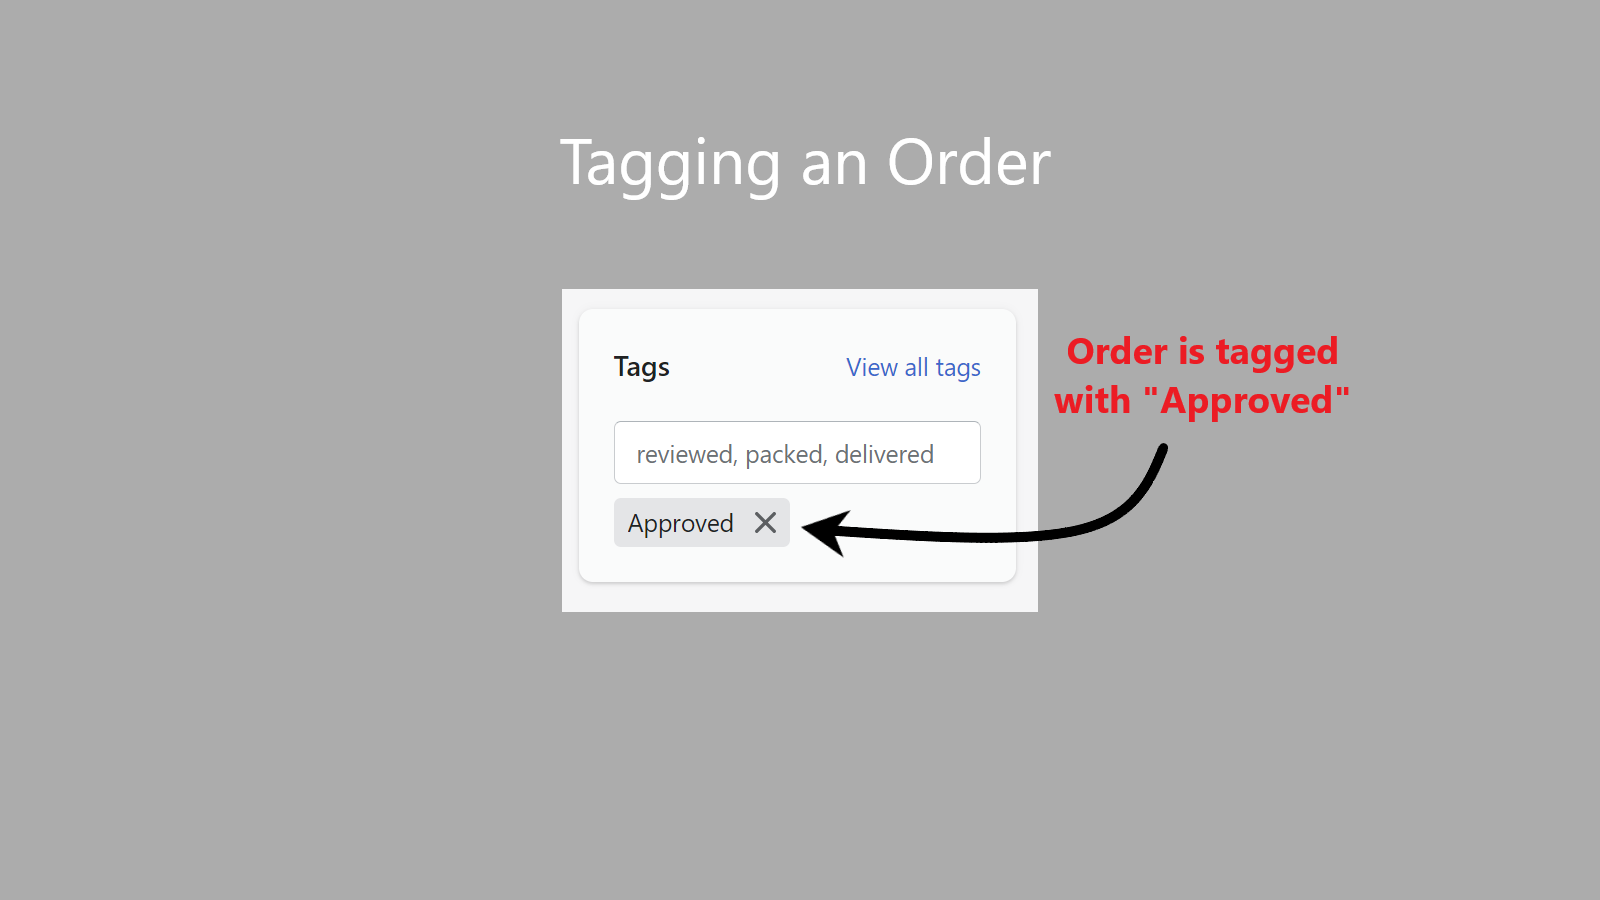 image of an order after being tagged